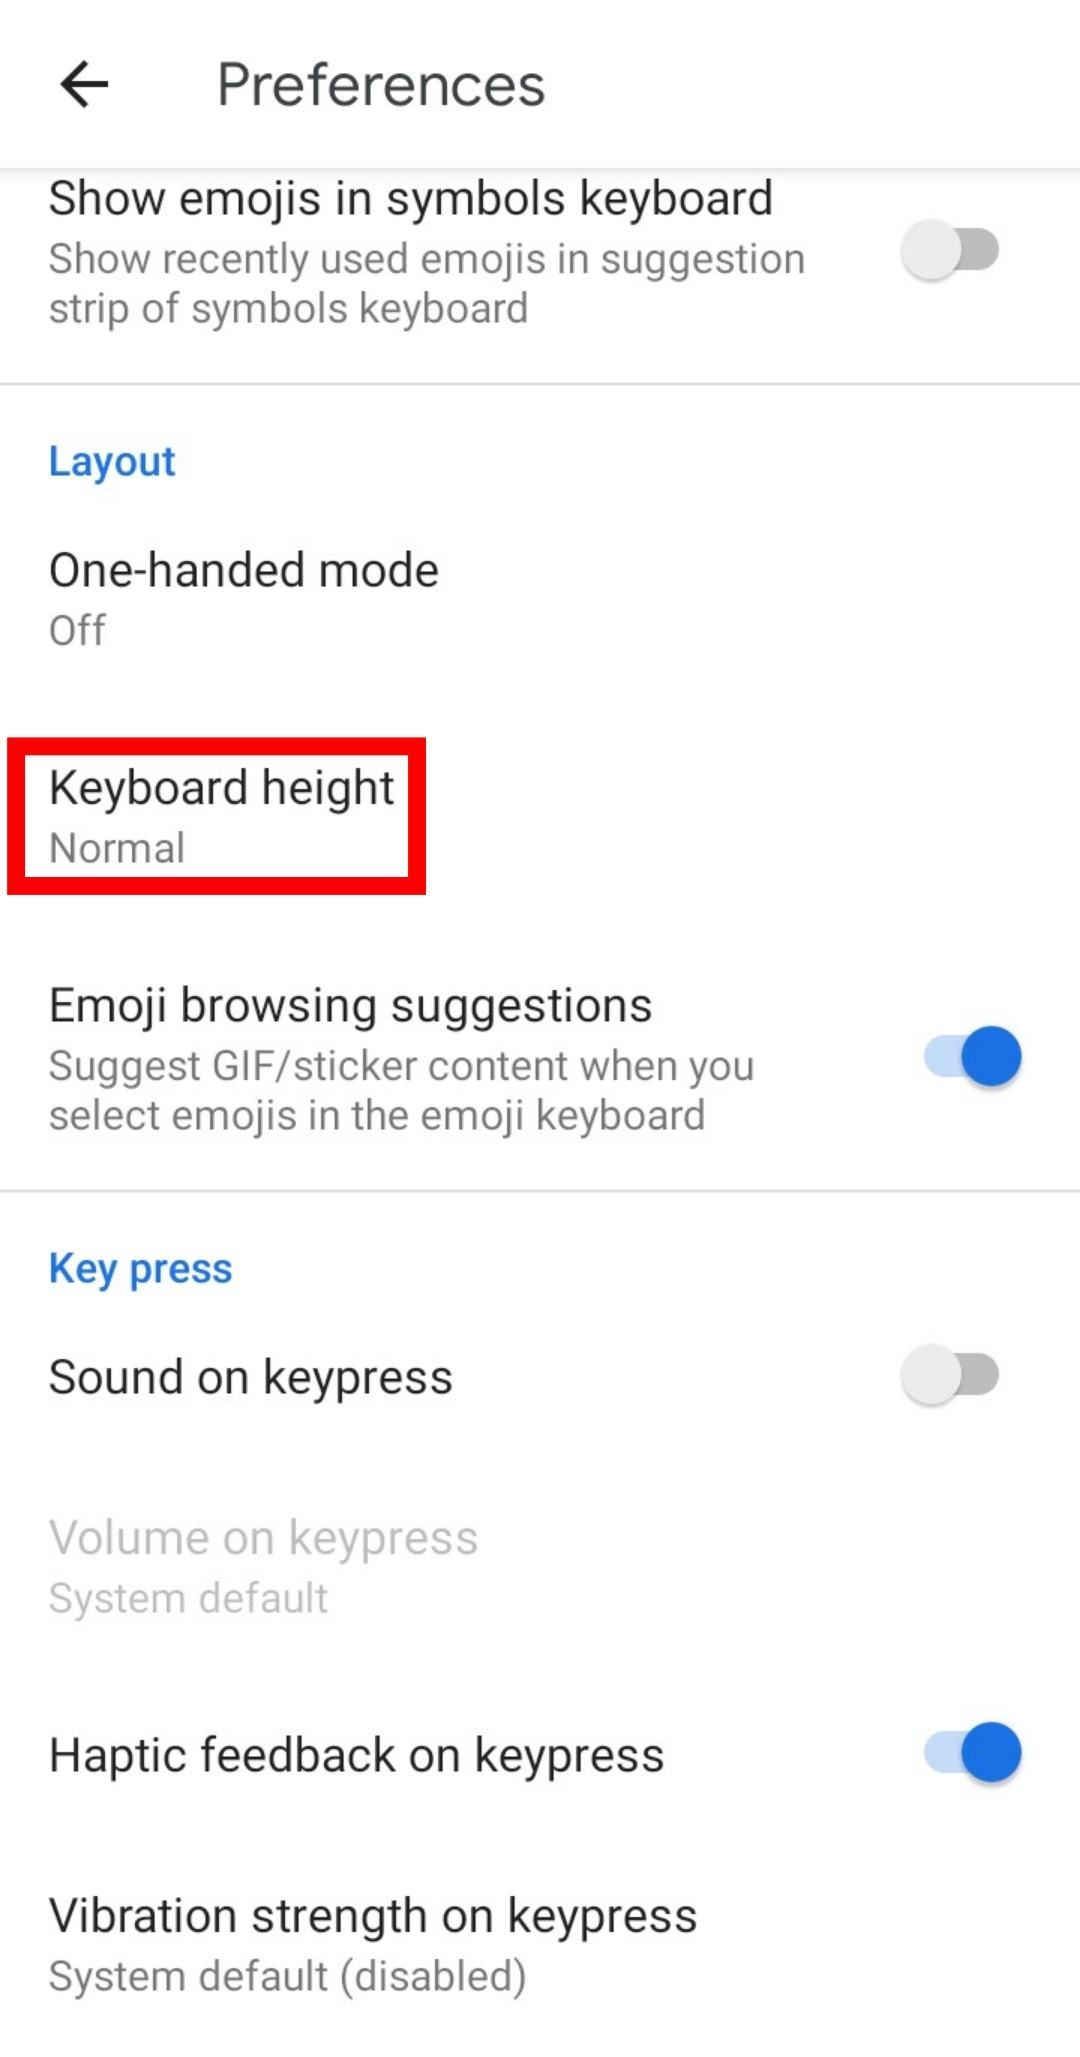 The keyboard height option in Android